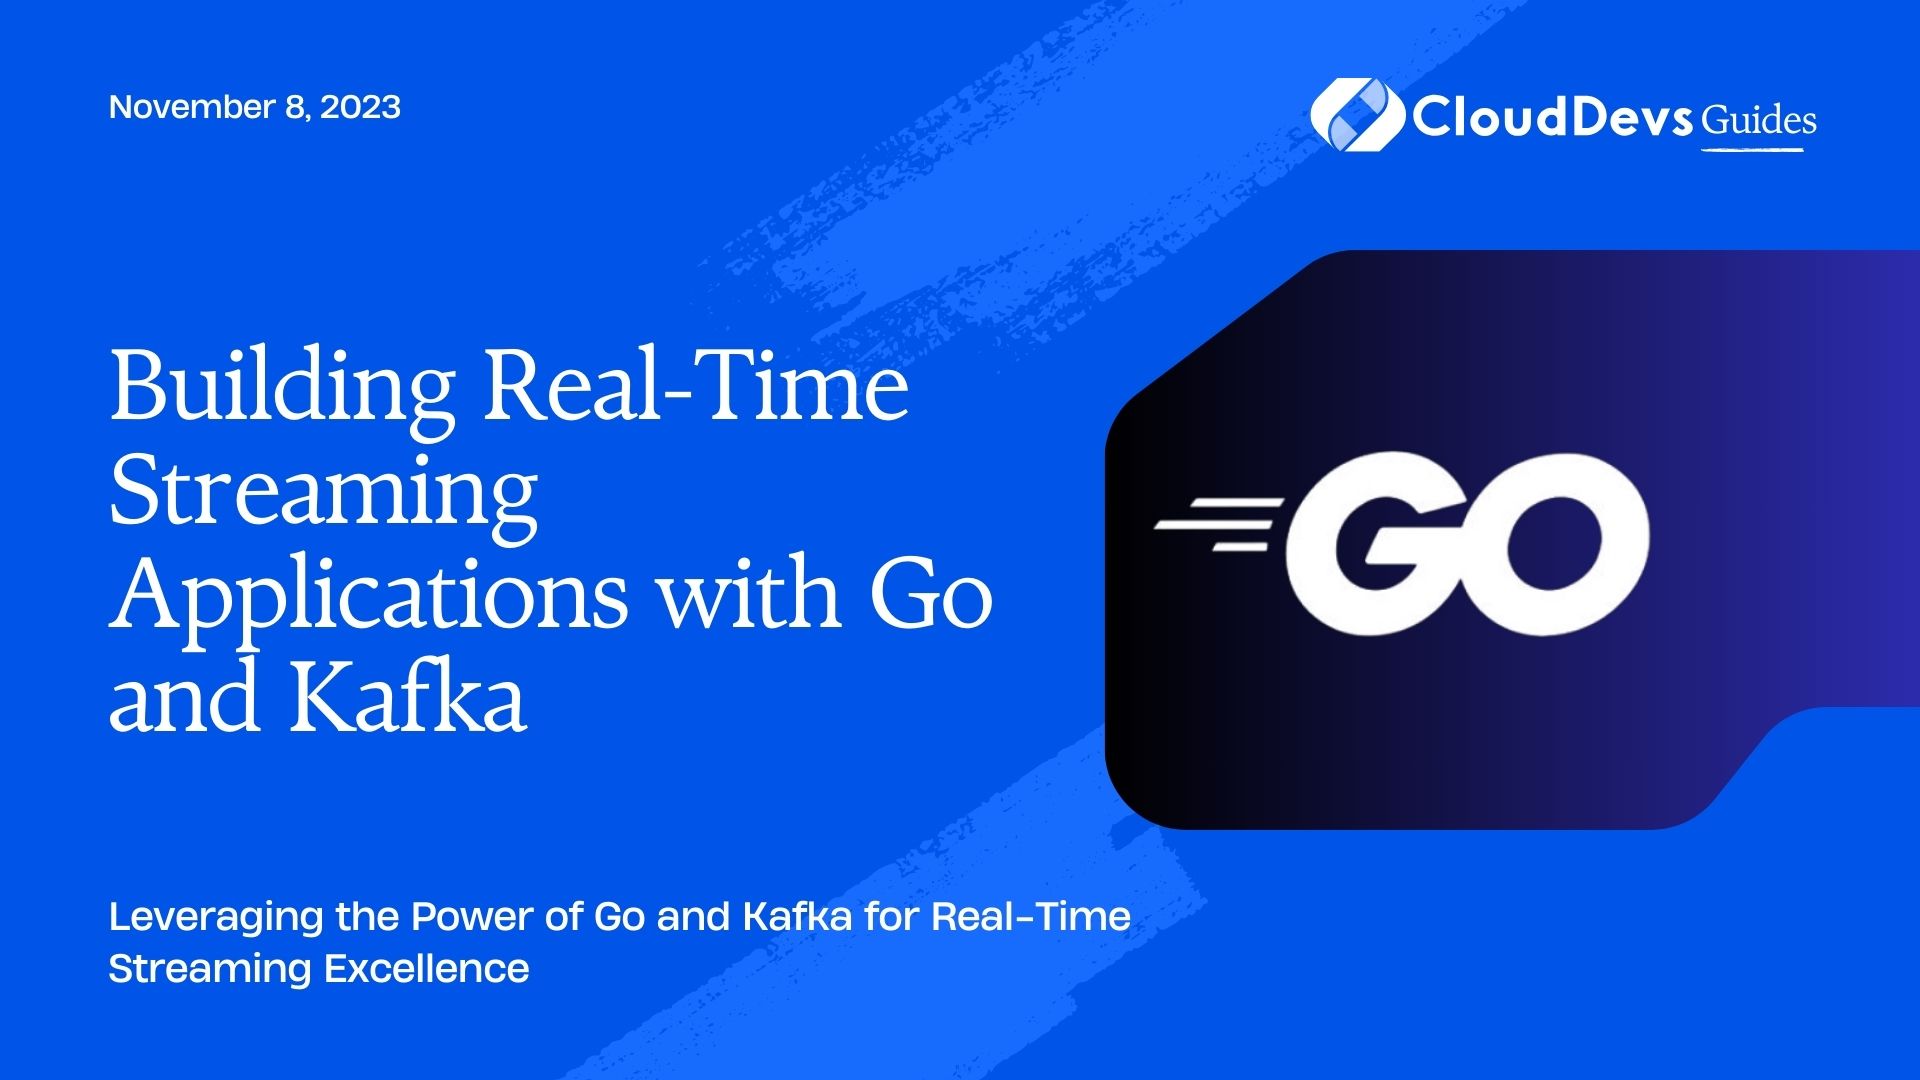 Building Real-Time Streaming Applications with Go and Kafka